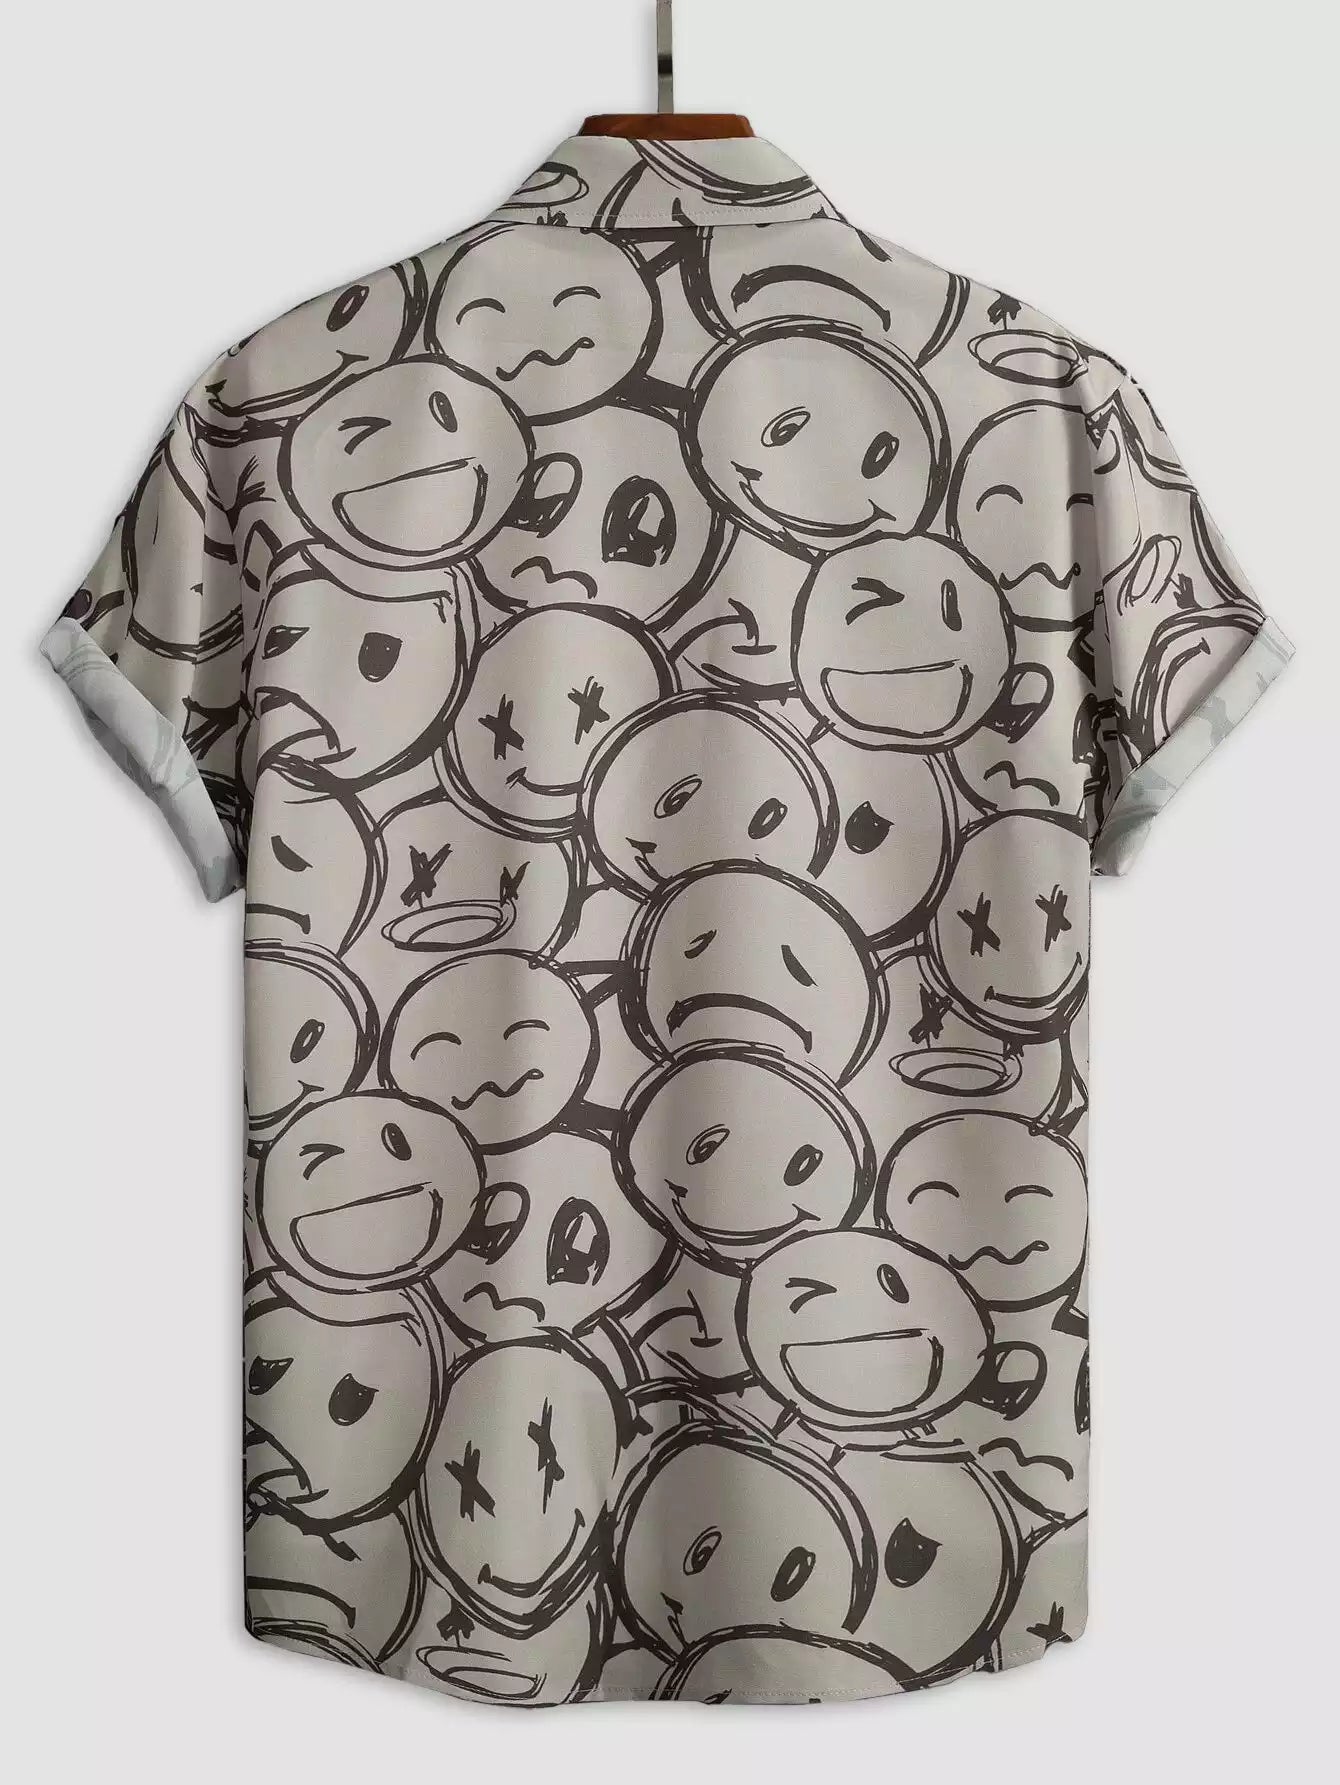 Gray and White Emoji Design Beach and casual Multicolor Printed Shirt Cotton Material Half Sleeves Mens roscoe